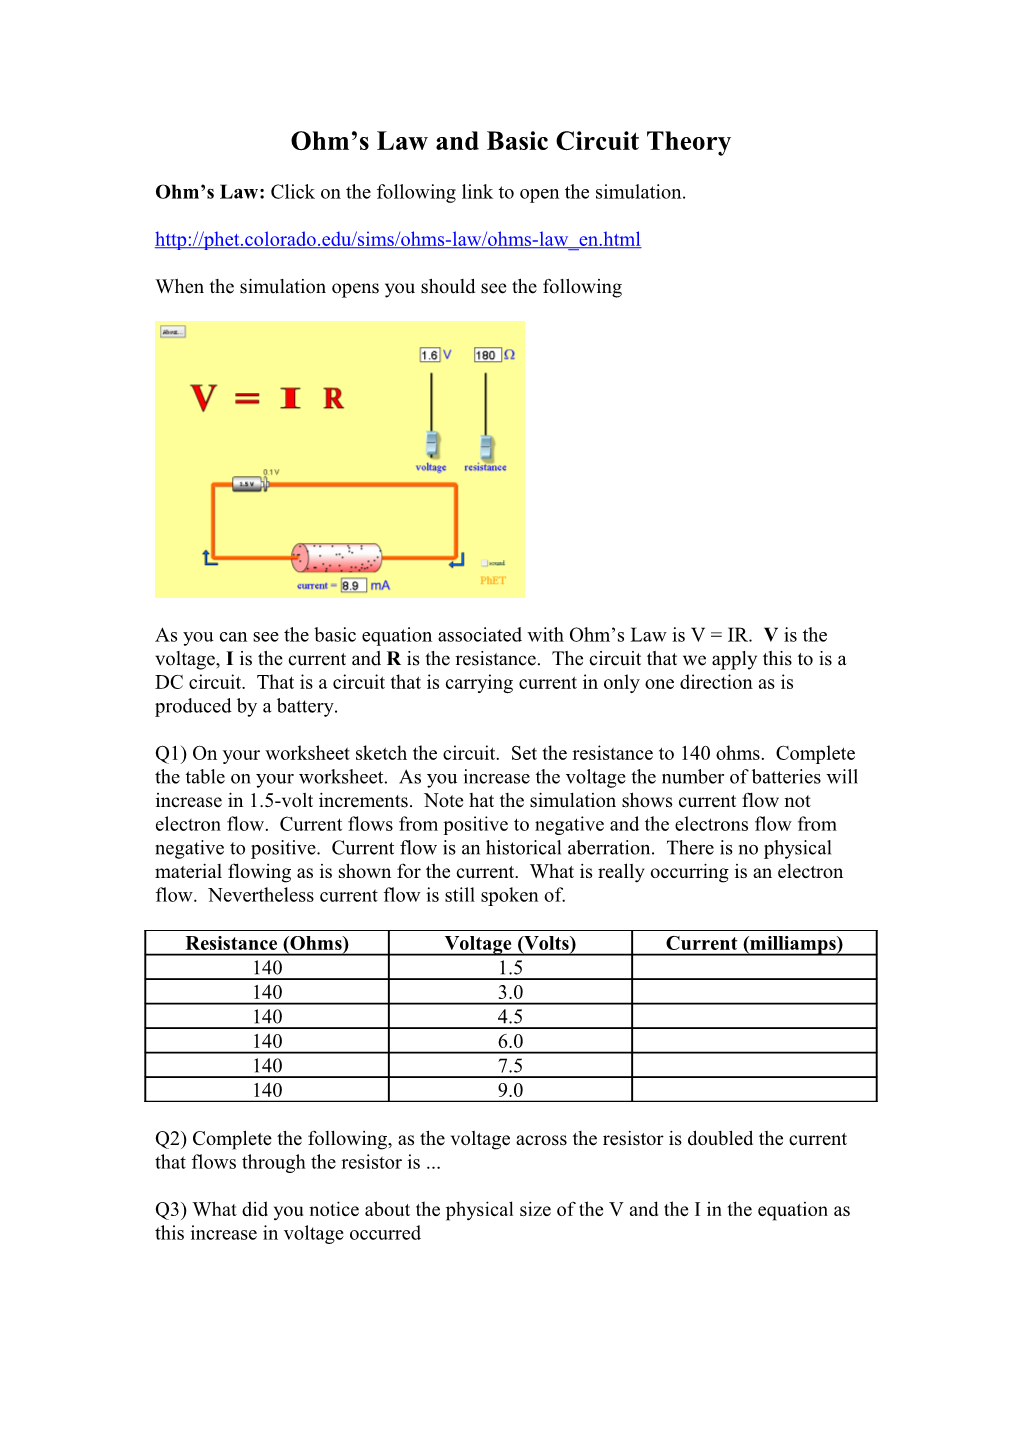 Ohms Law and Basic Circuit Theory